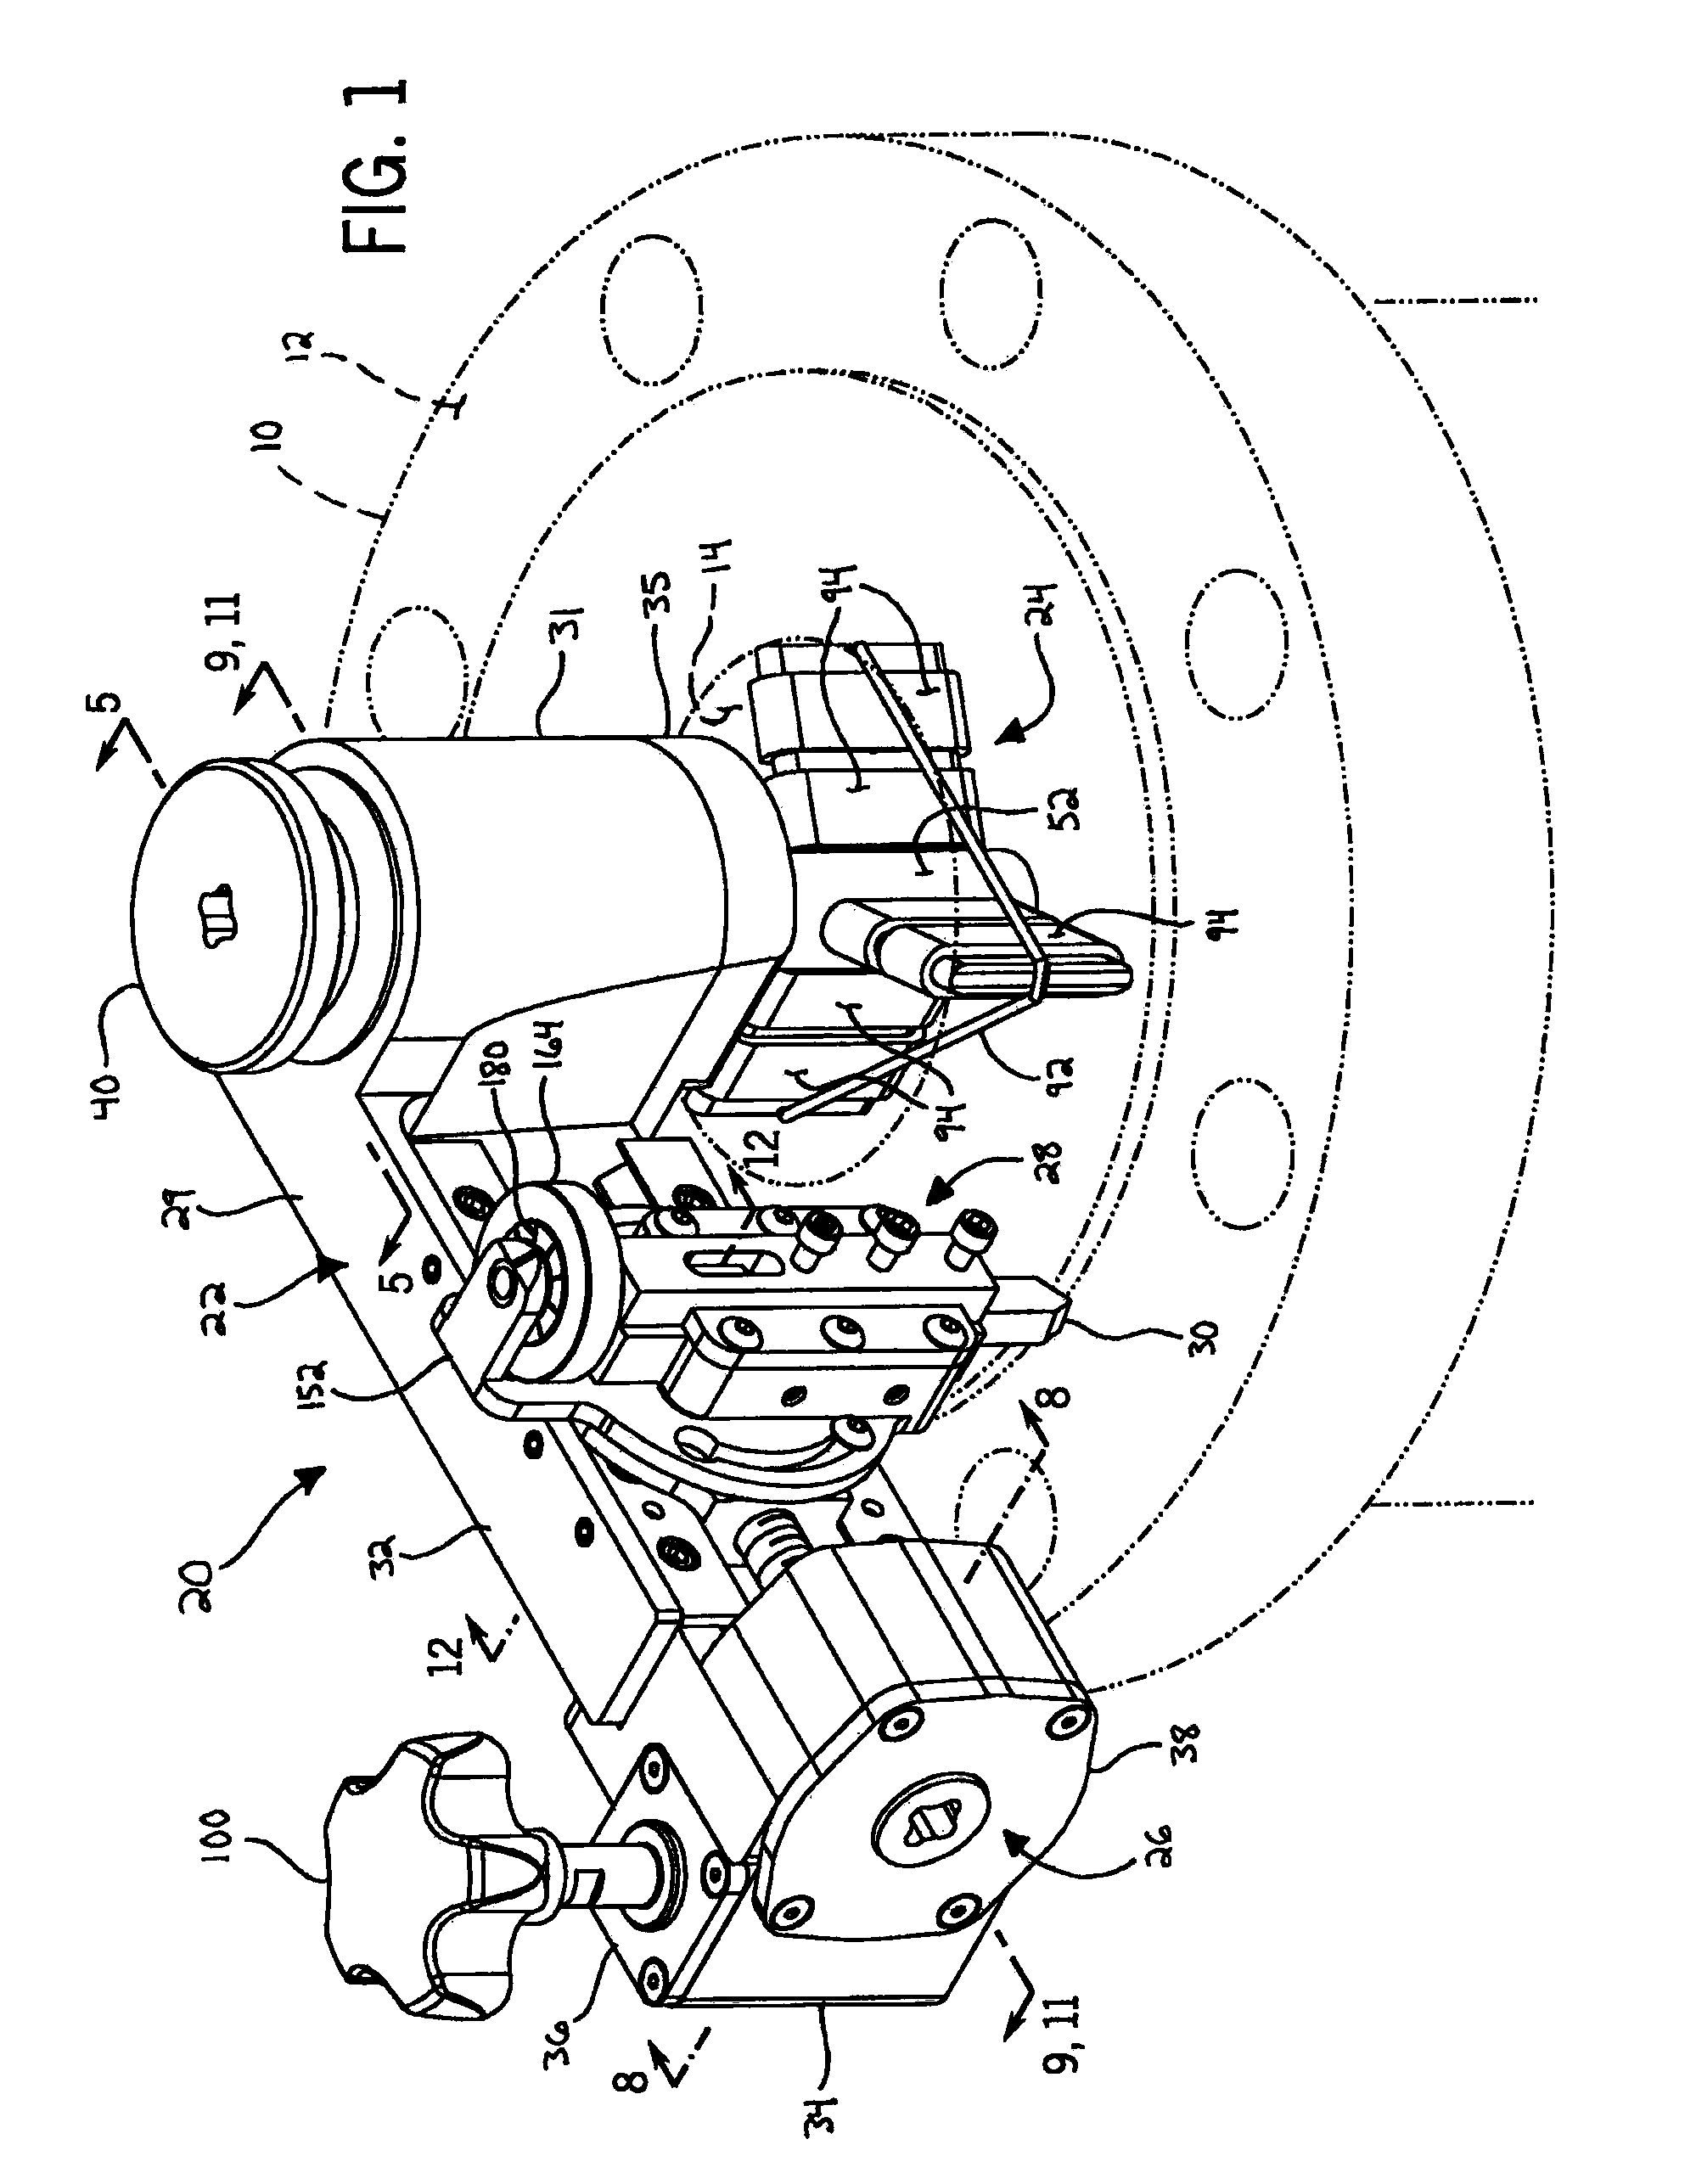 Pipe Flange Facing Apparatus and Method